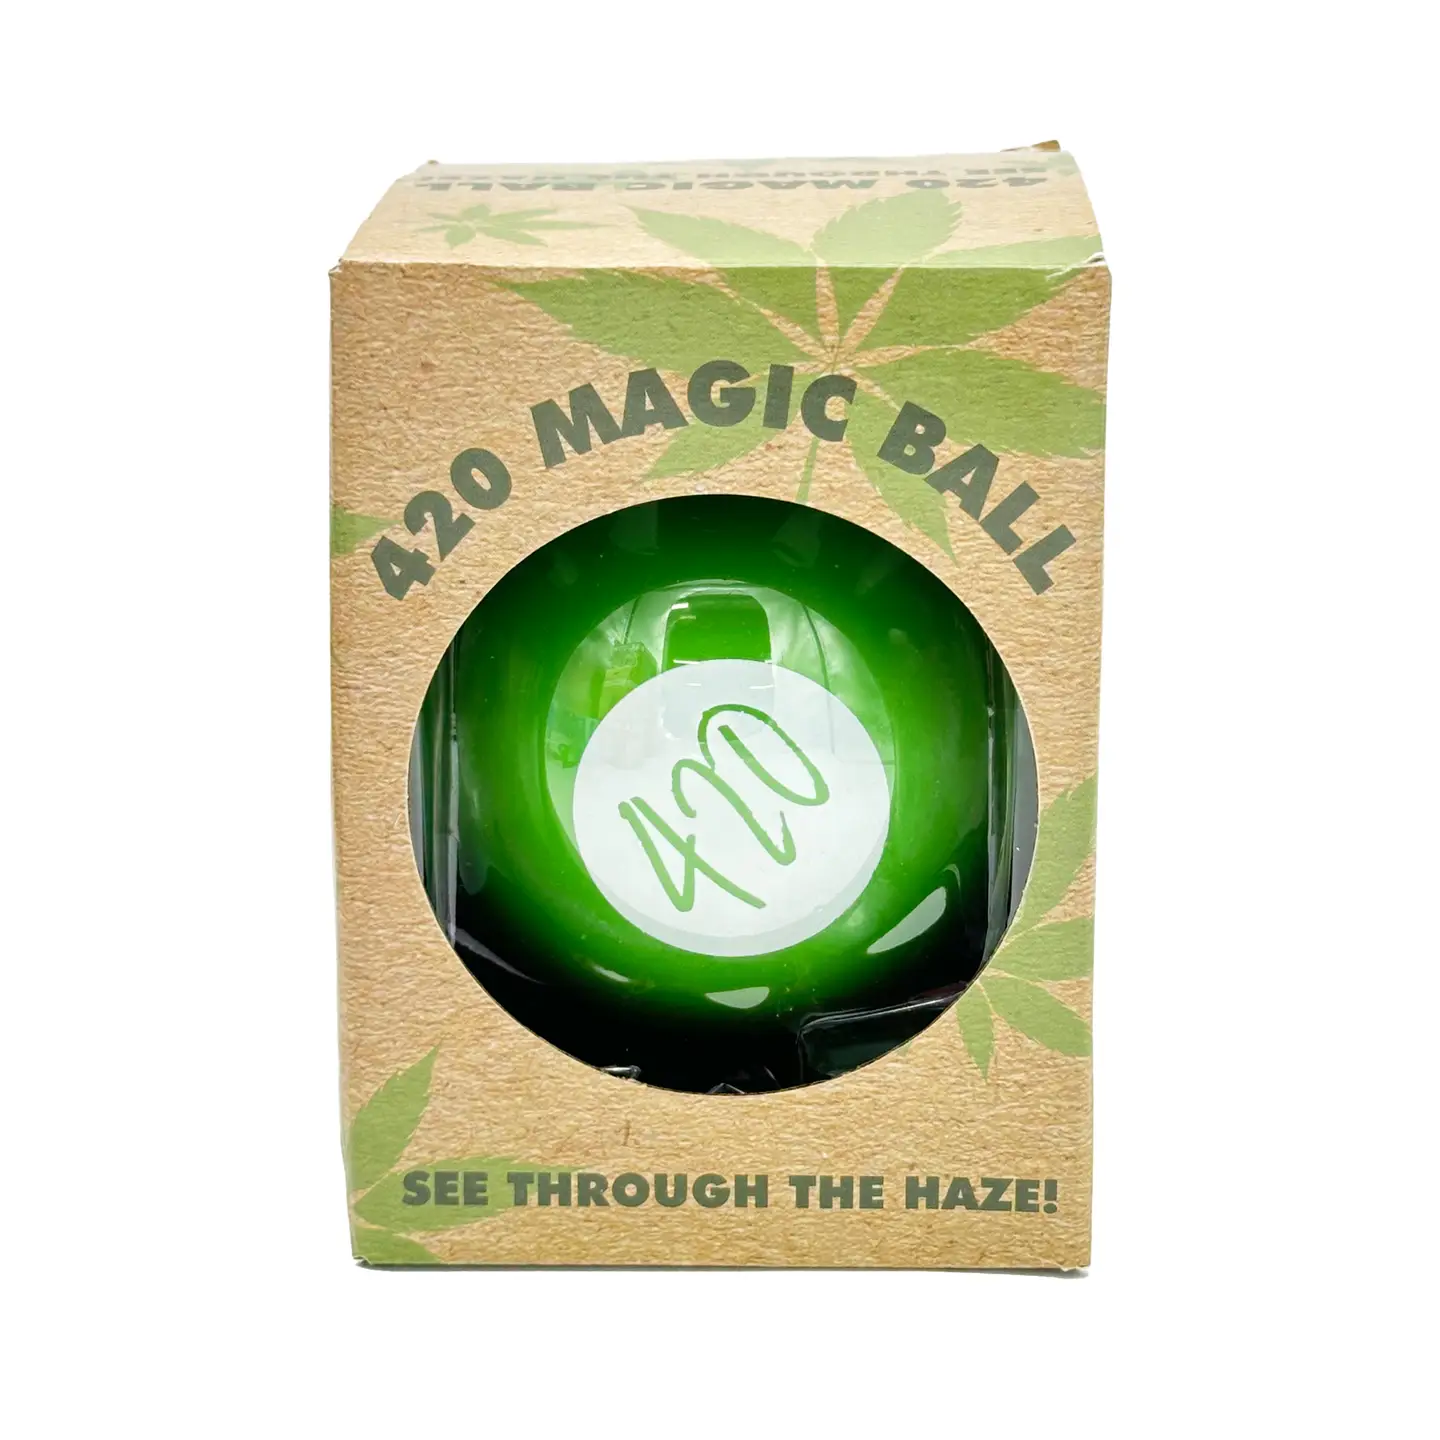 Take the guesswork out of those tough decisions and let the 420 Magic Ball decide! This quirky magic ball style decision maker features 420 hilarious sayings instead of the usual advice. It's the perfect gift for the stoner in your life. It's sure to bring some laughs, and you'll never have to worry about any boring decisions again!